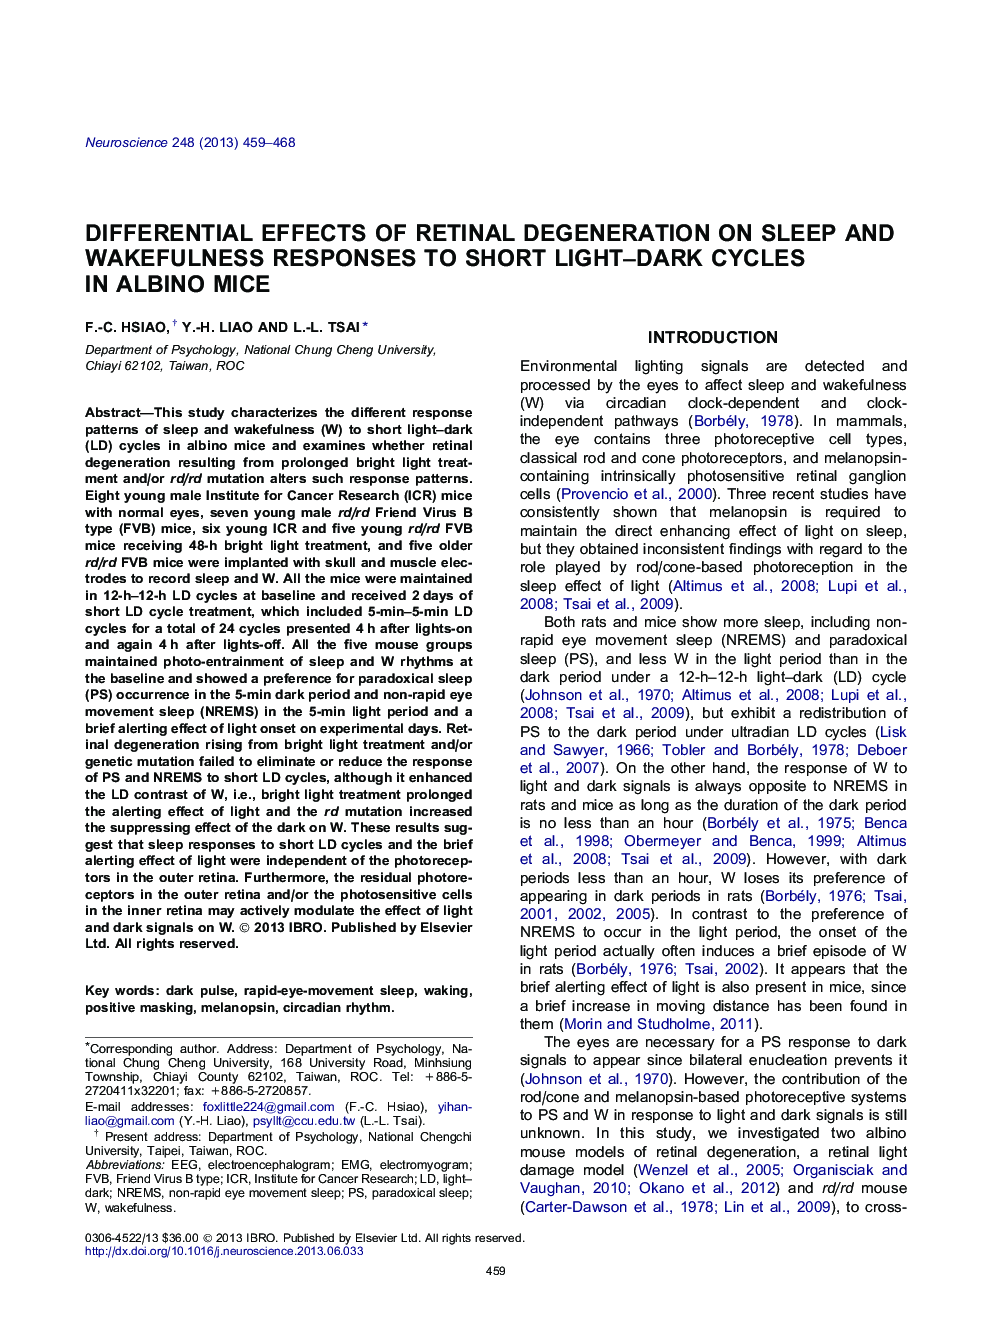 Differential effects of retinal degeneration on sleep and wakefulness responses to short light-dark cycles in albino mice